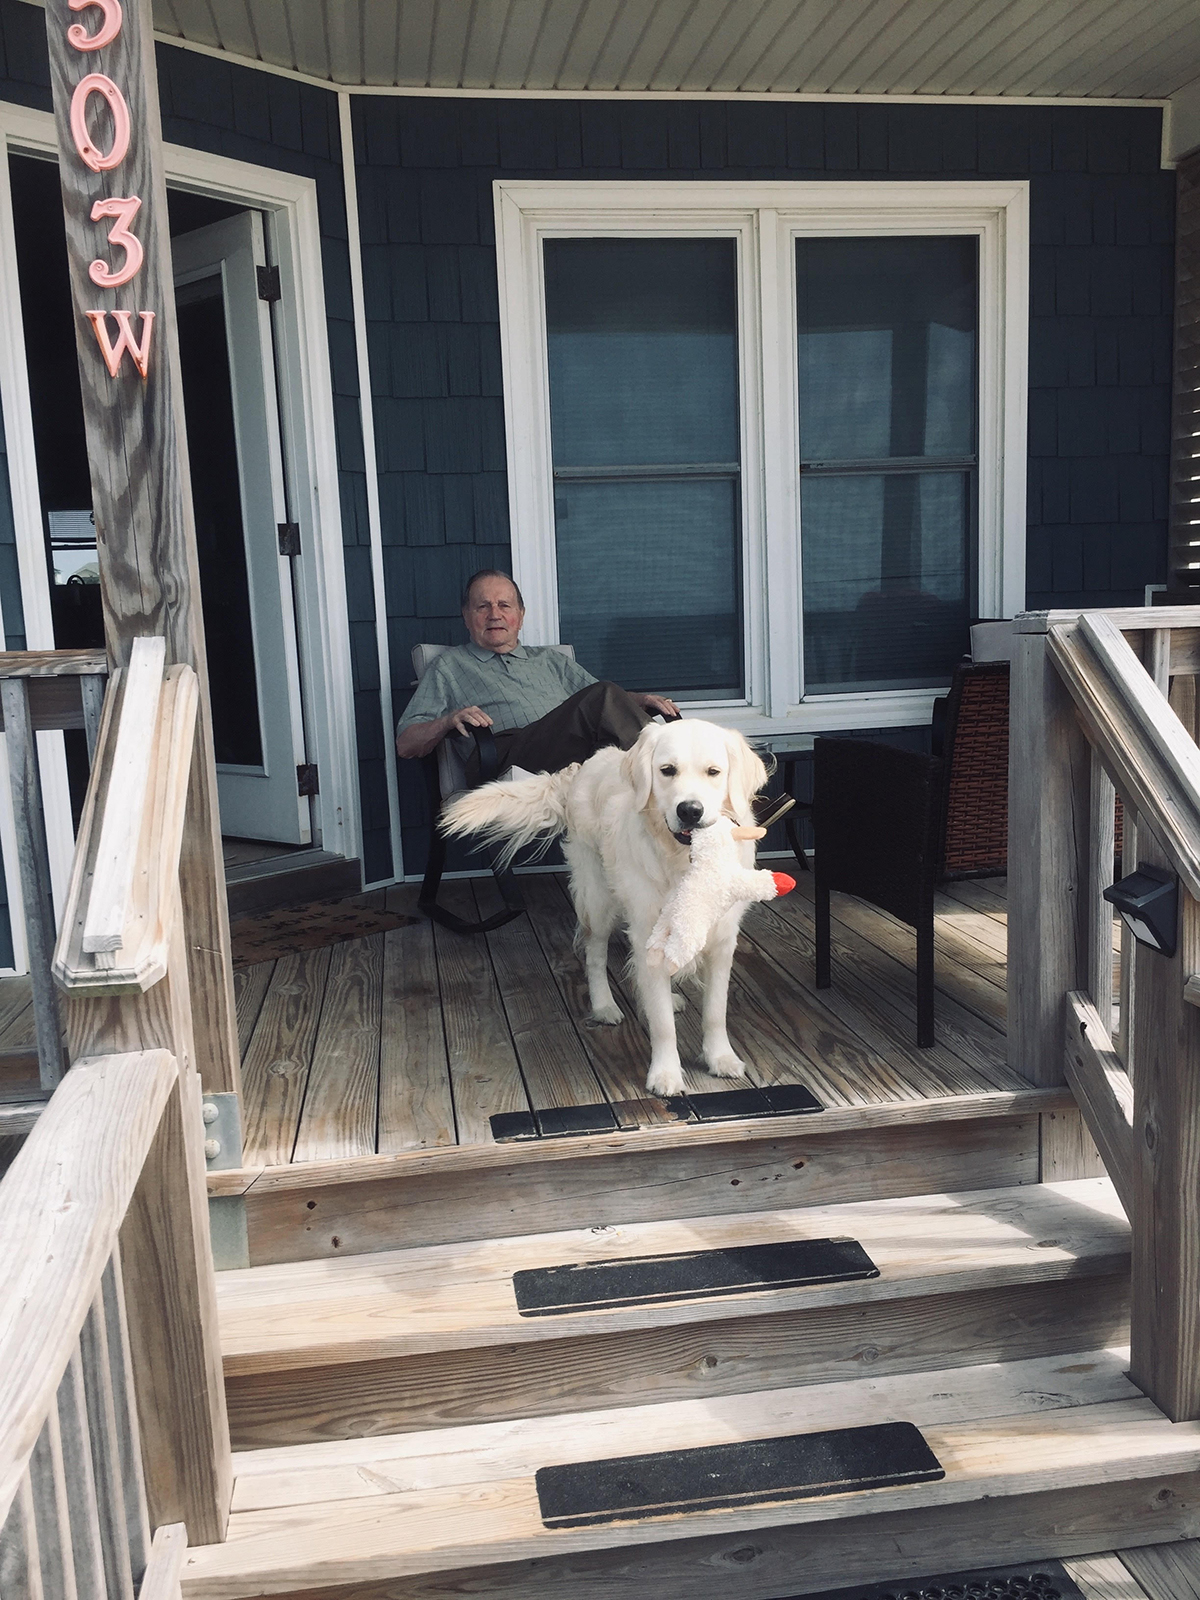 Ted Barrows ’55 on the porch with dog